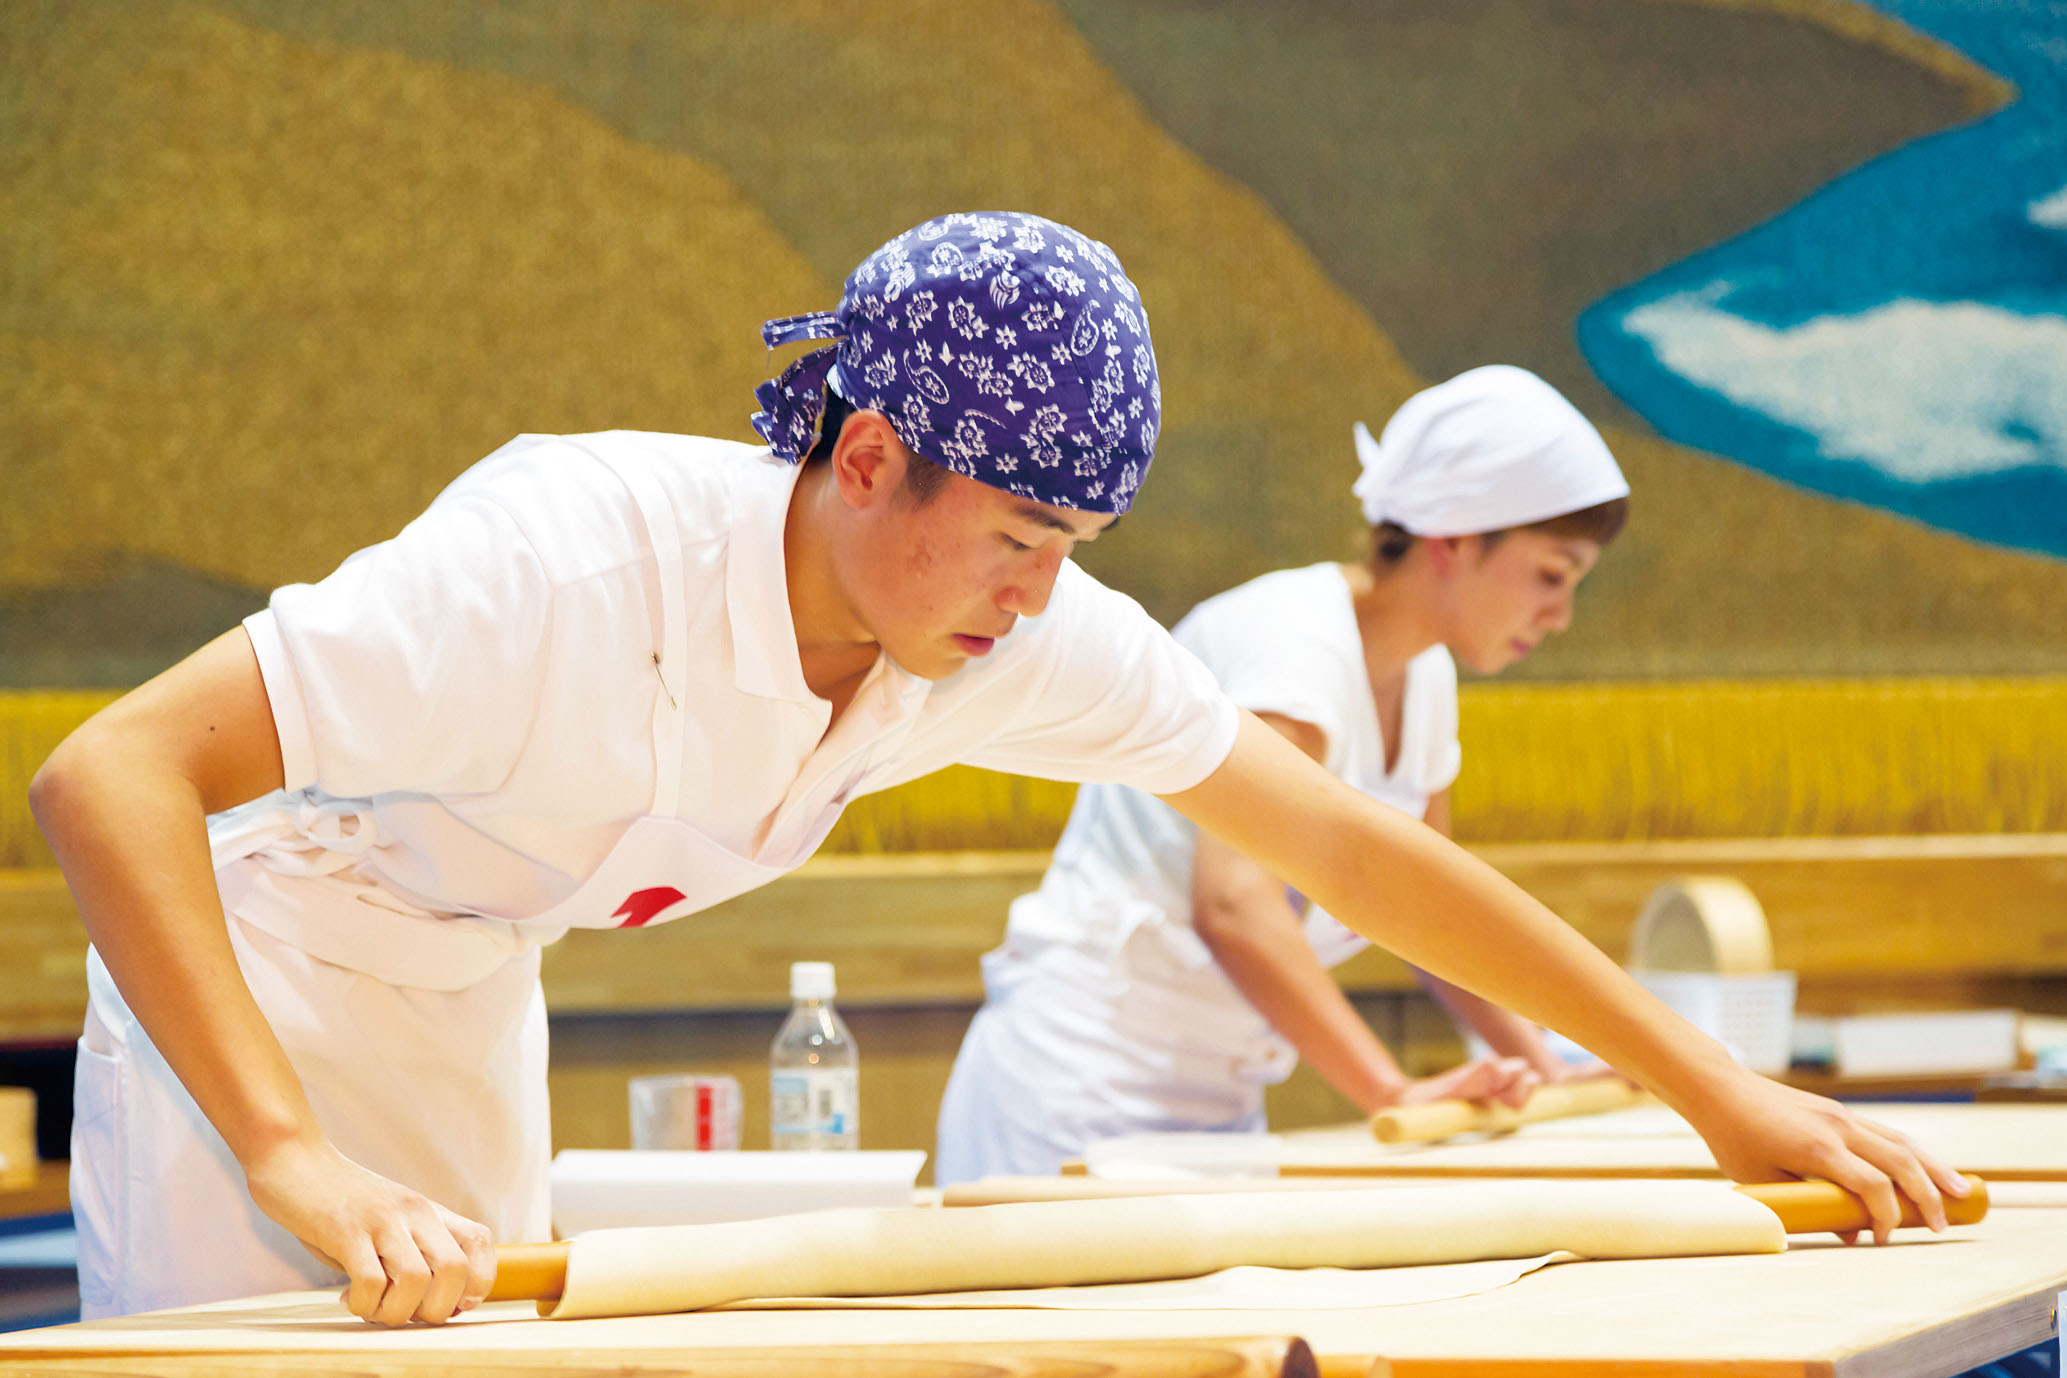 Oigami hot spring soba Festival is held at the same time as “Amateur Soba-making Ranking Championship”